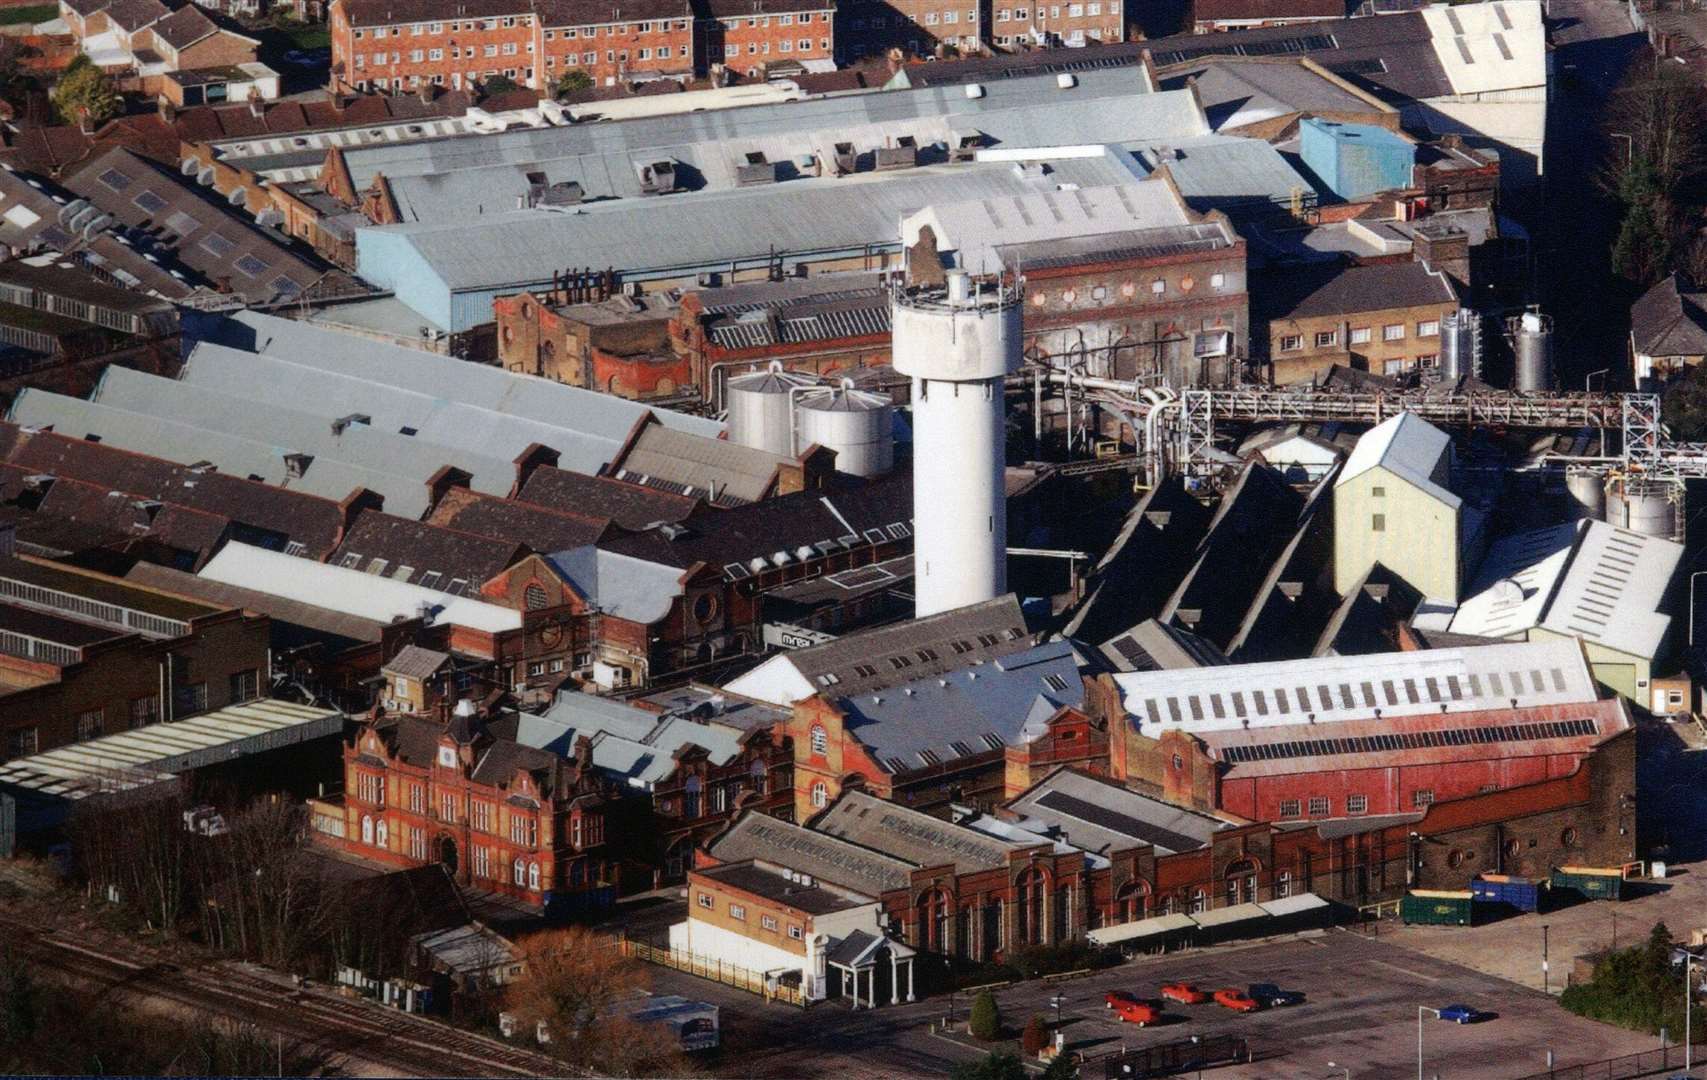 An aerial view of Sittingbourne mill